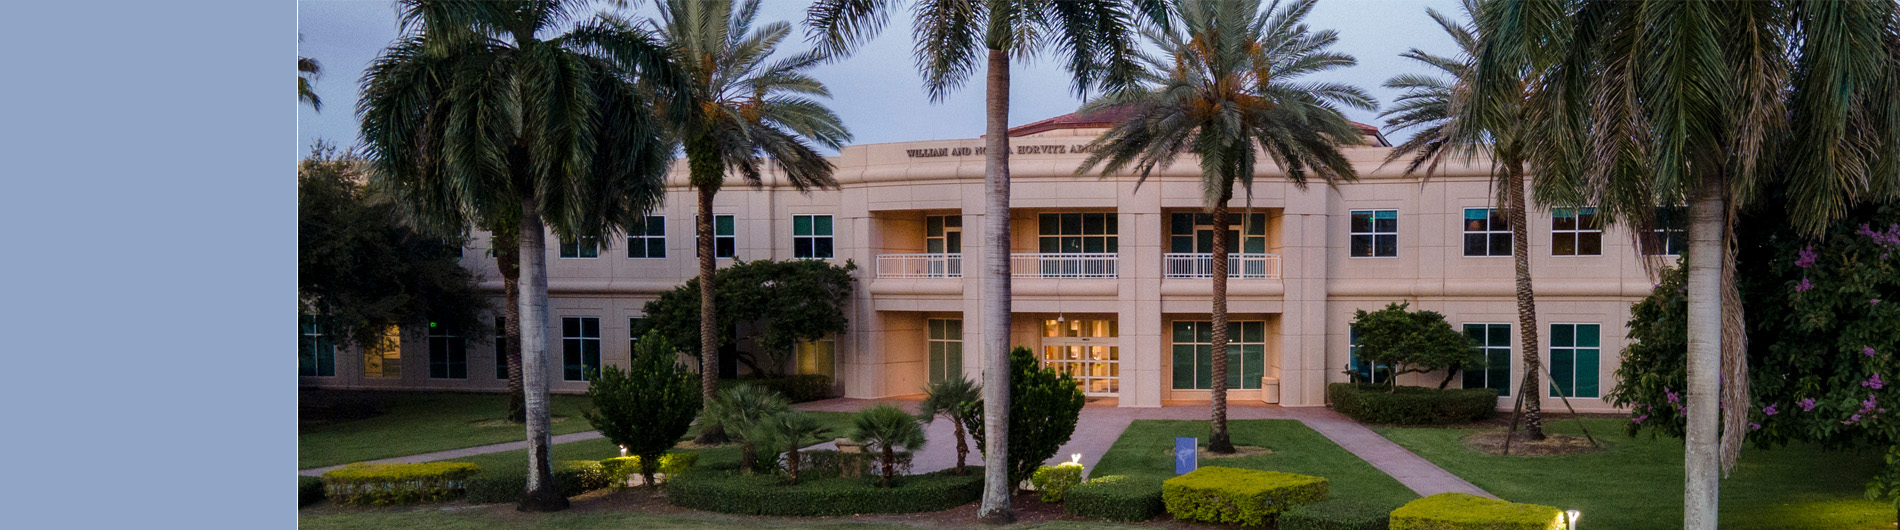 panoramic-shot-of-nsu-Florida-campus-including-palm-trees-and-sunny-skies